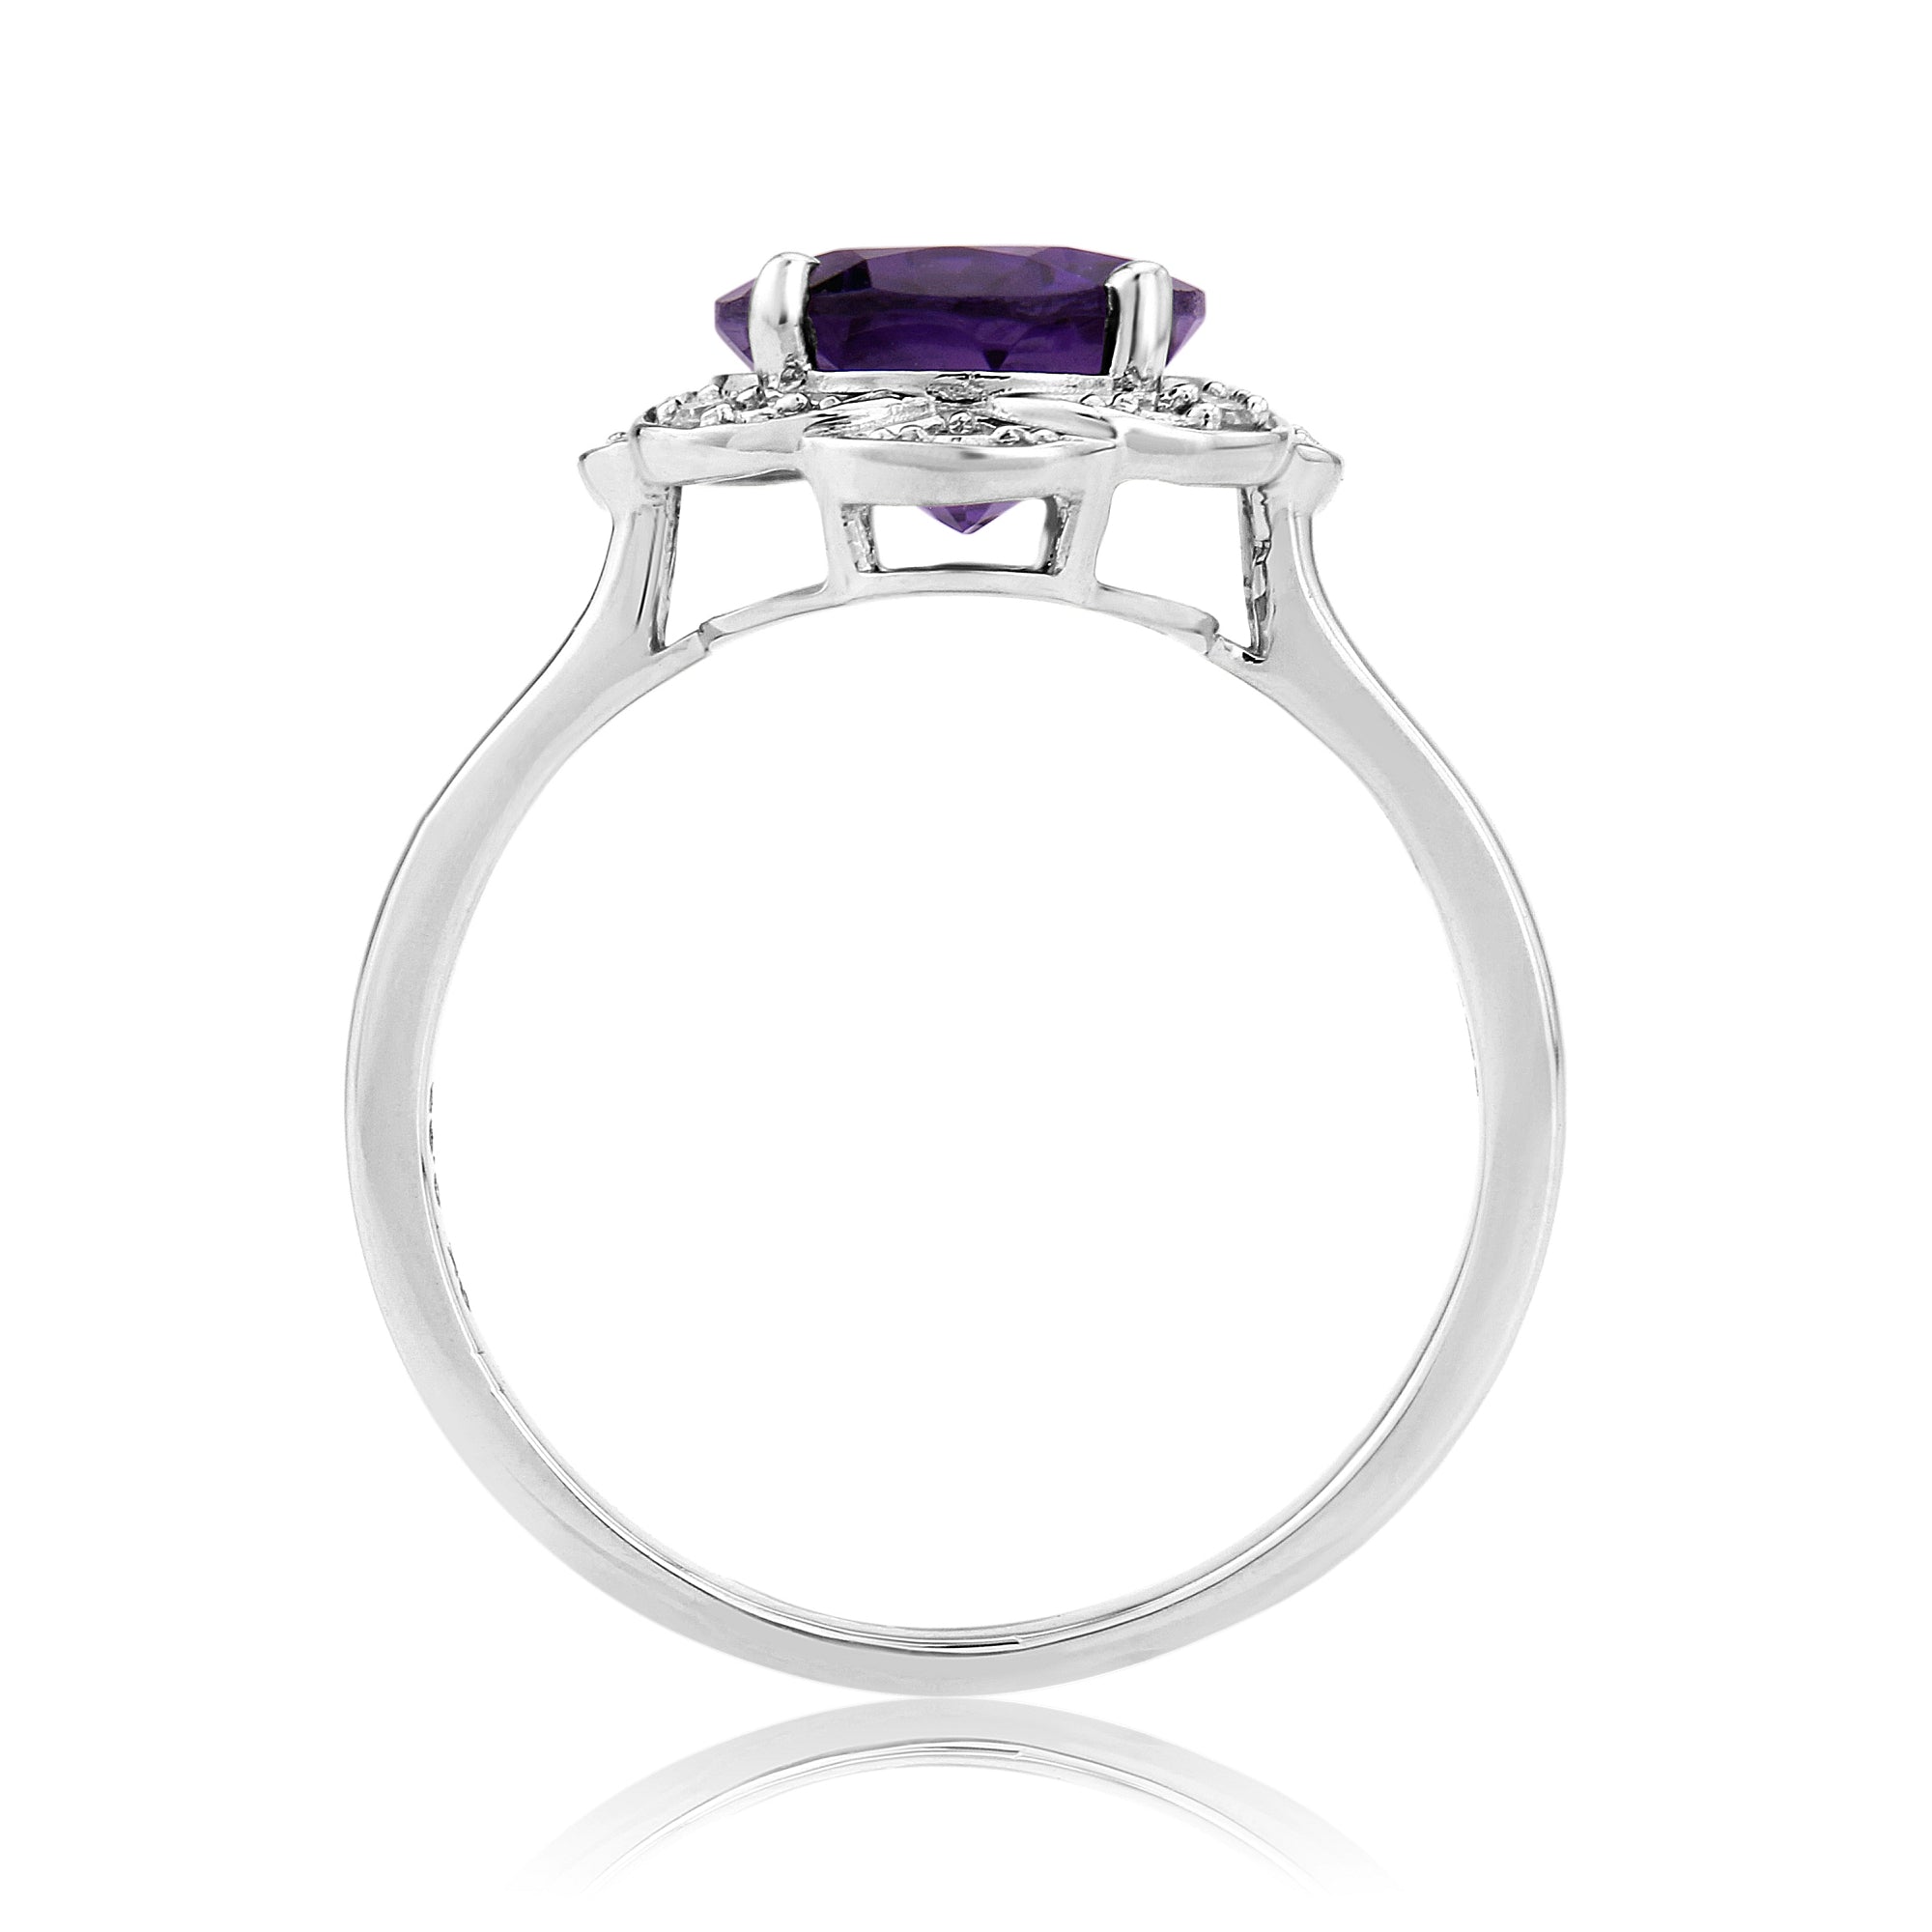 9ct white gold 10x8mm oval amethyst & diamond cluster ring 0.03ct